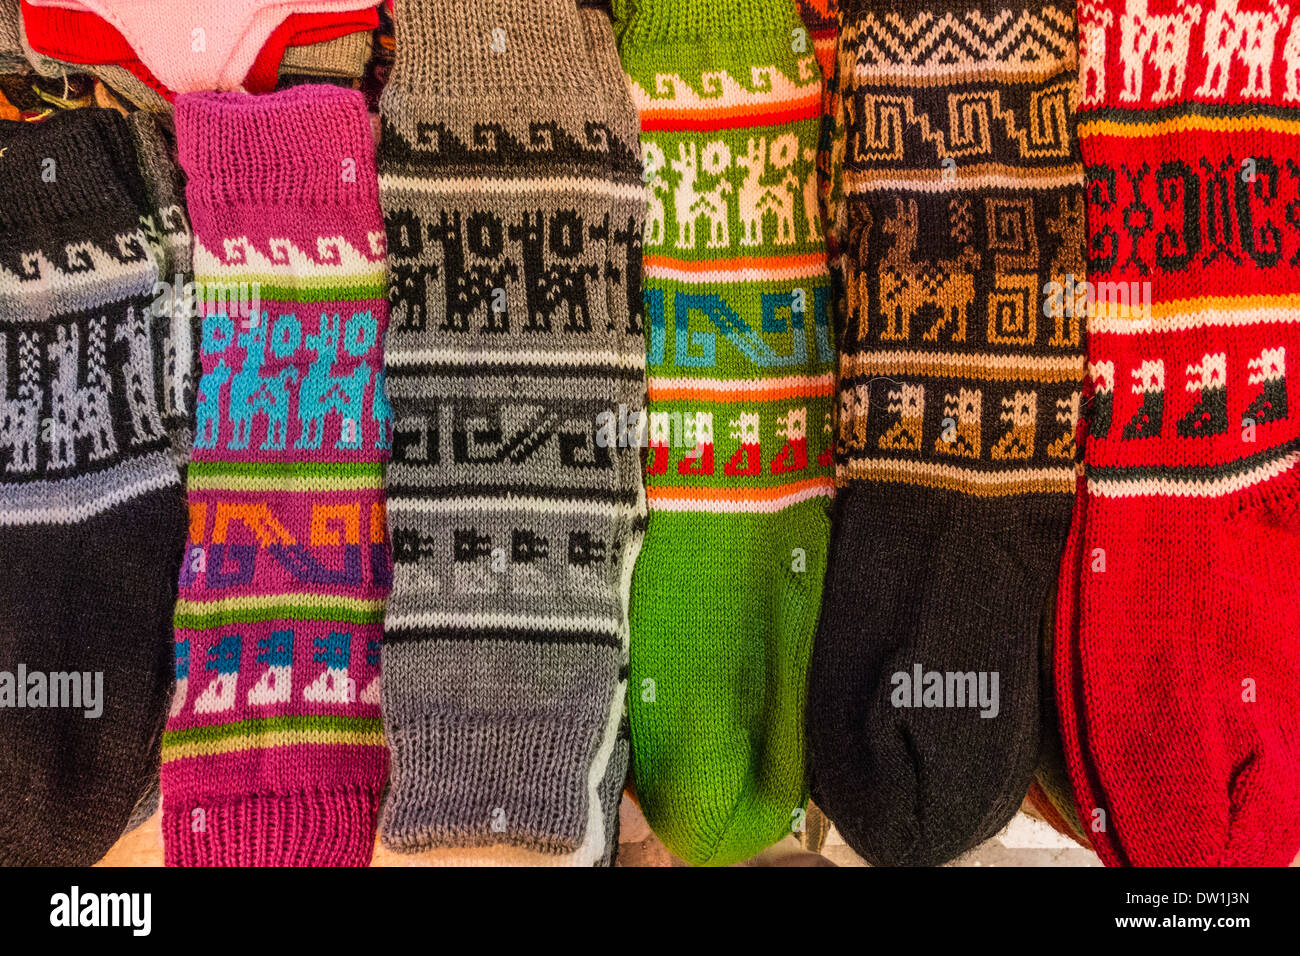 Colorful Bolivian socks on display for sale in a vendor's stall in the La Cancha market in Cochabamba, Bolivia. Stock Photo